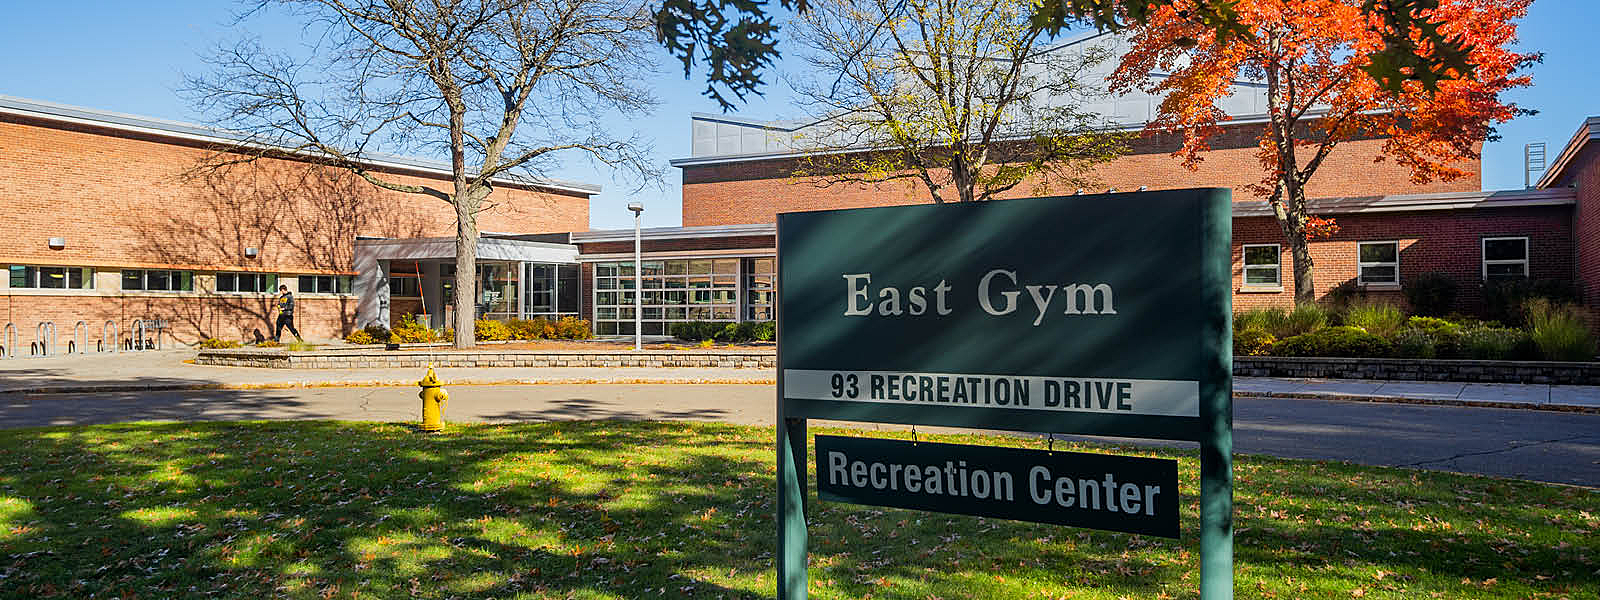 East Gym building with directory sign out front